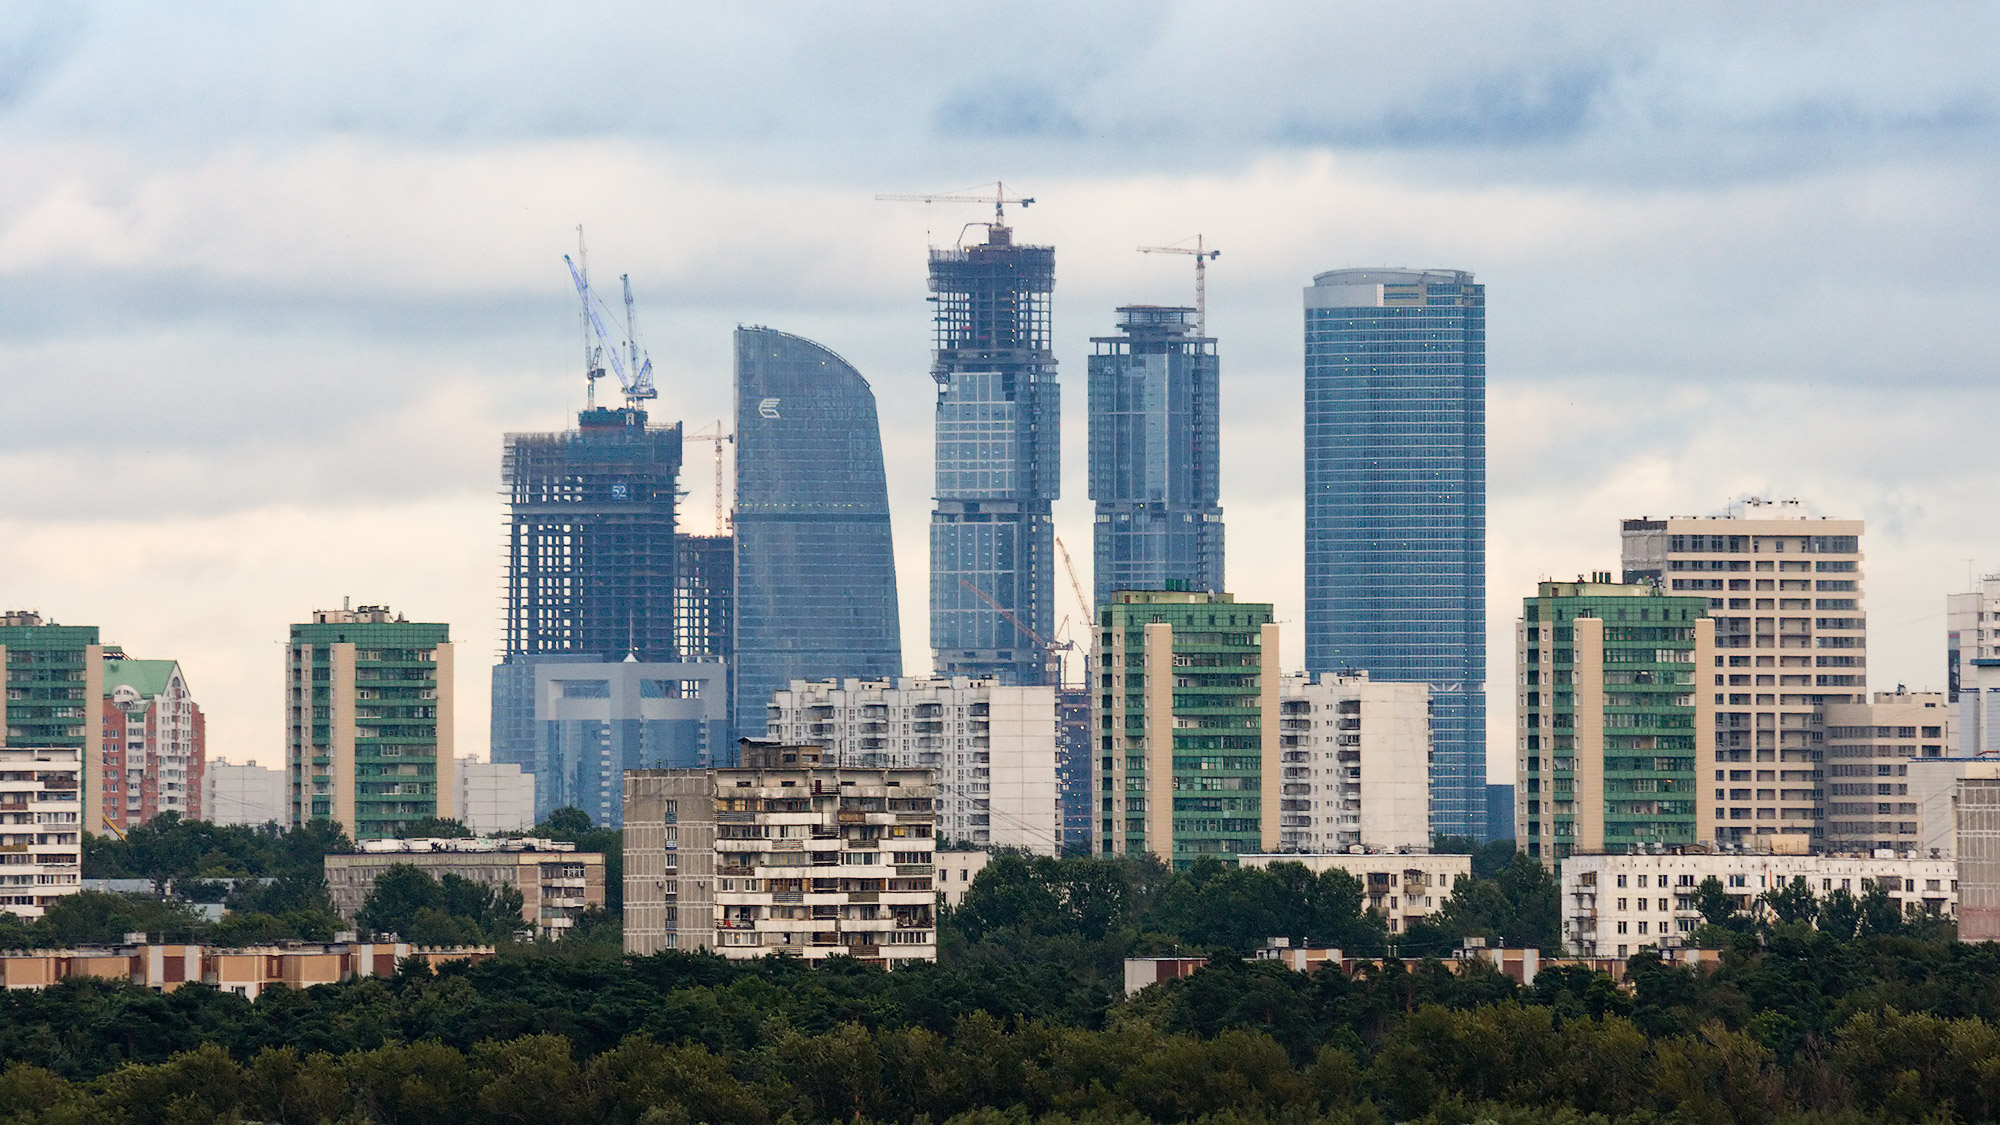 File:Moscow City landscape july 2008.jpg - Wikimedia Commons